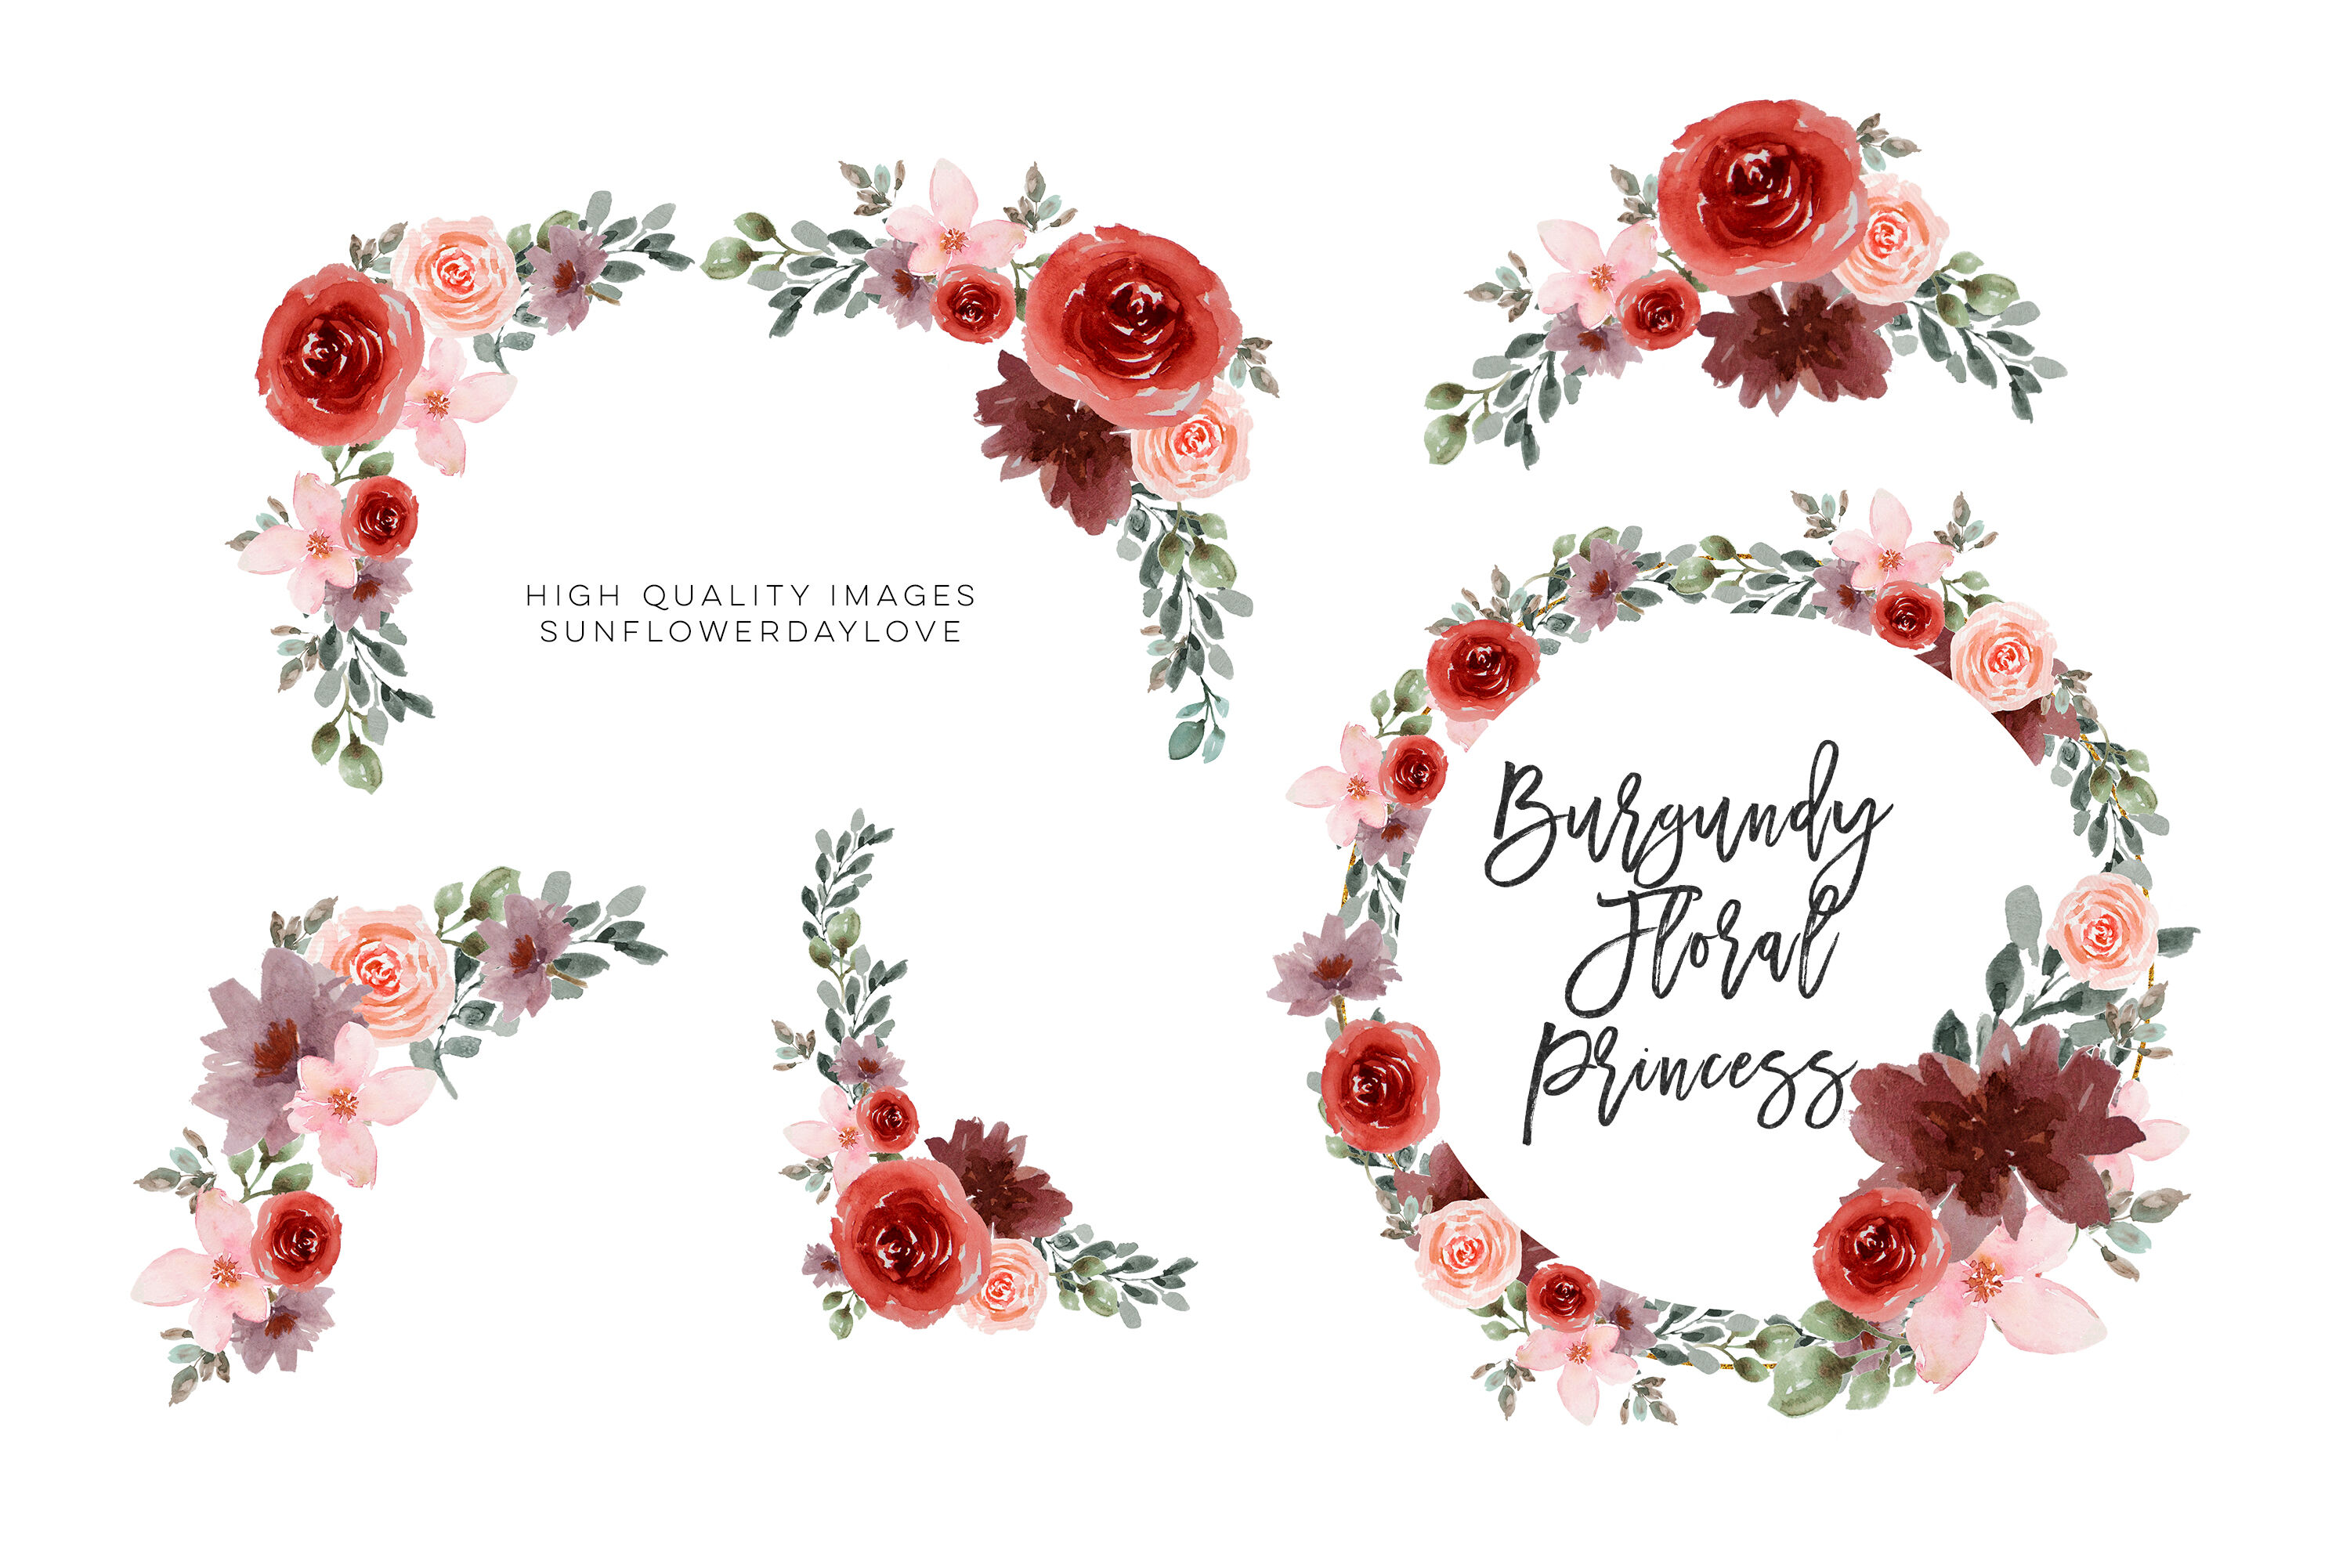 Watercolor flower frame clipart, Wedding Burgundy floral clipart By  Sunflower Day Love